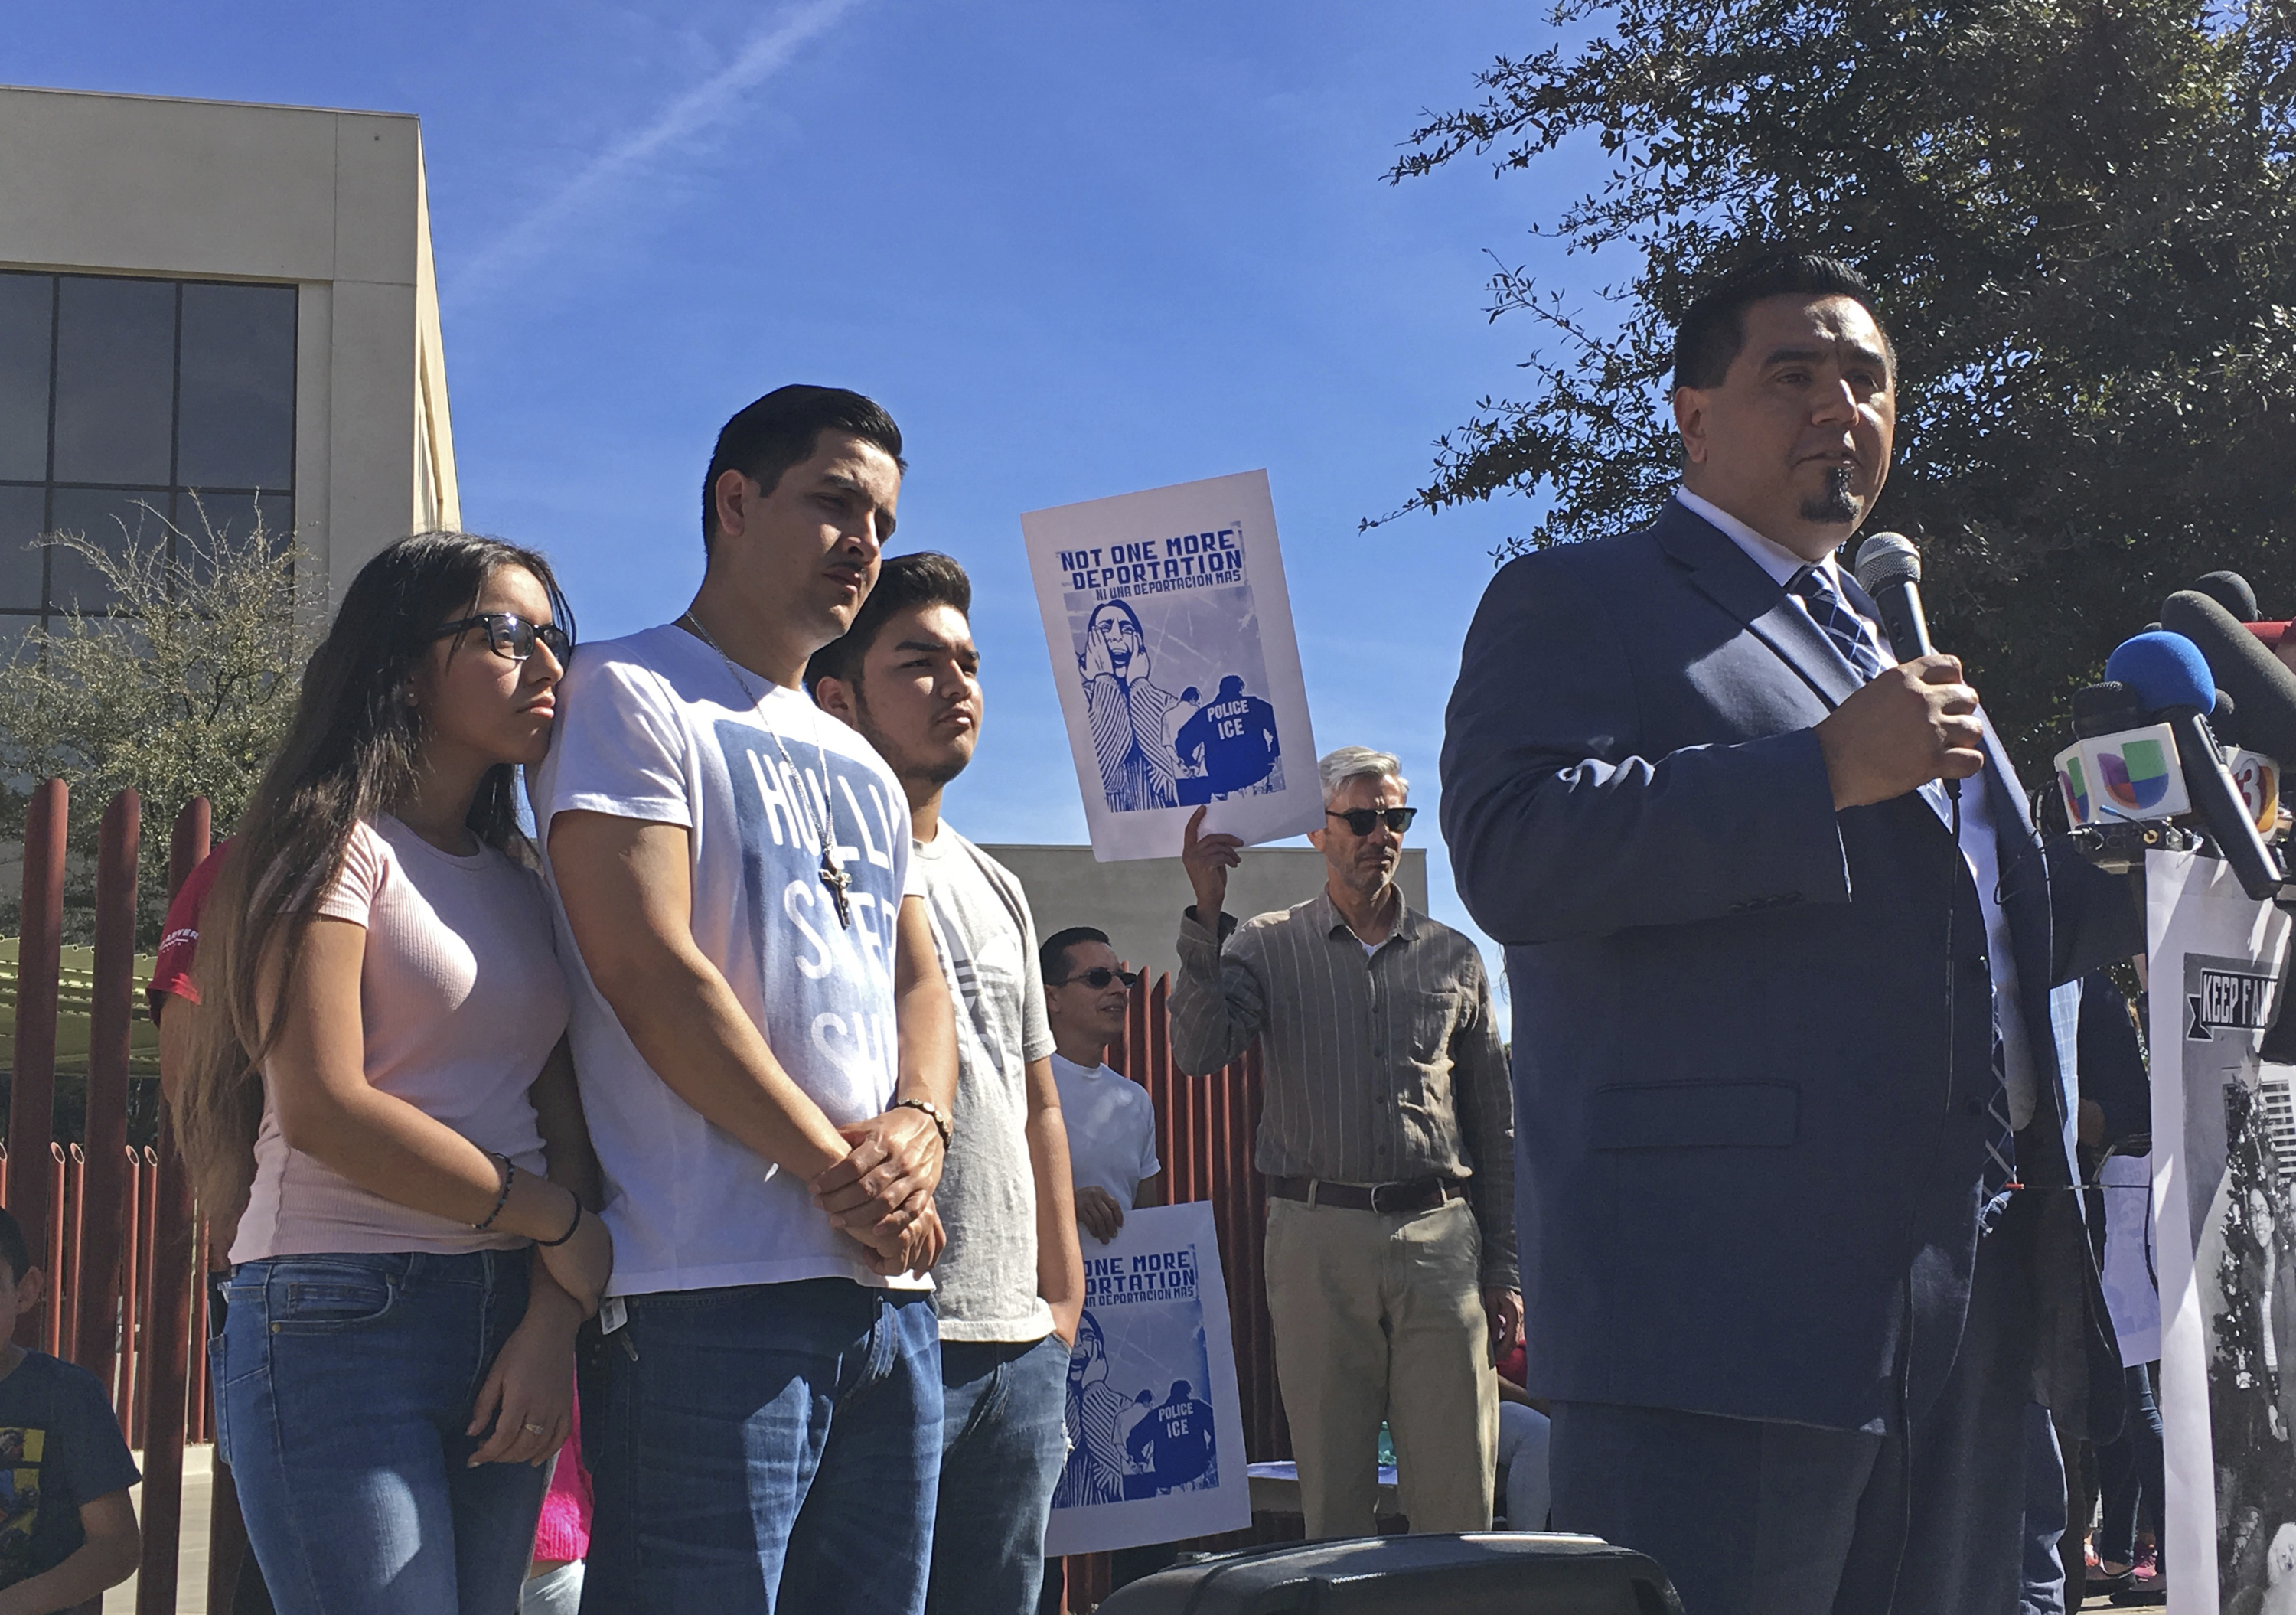 The family of Guadalupe Garcia de Rayos stands behind her attorney, Ray Ybarra Maldonado, as he speaks in front of the U.S. Immigration and Customs Enforcement office in Phoenix on Feb. 9, 2017. (Astrid Galvan—AP)